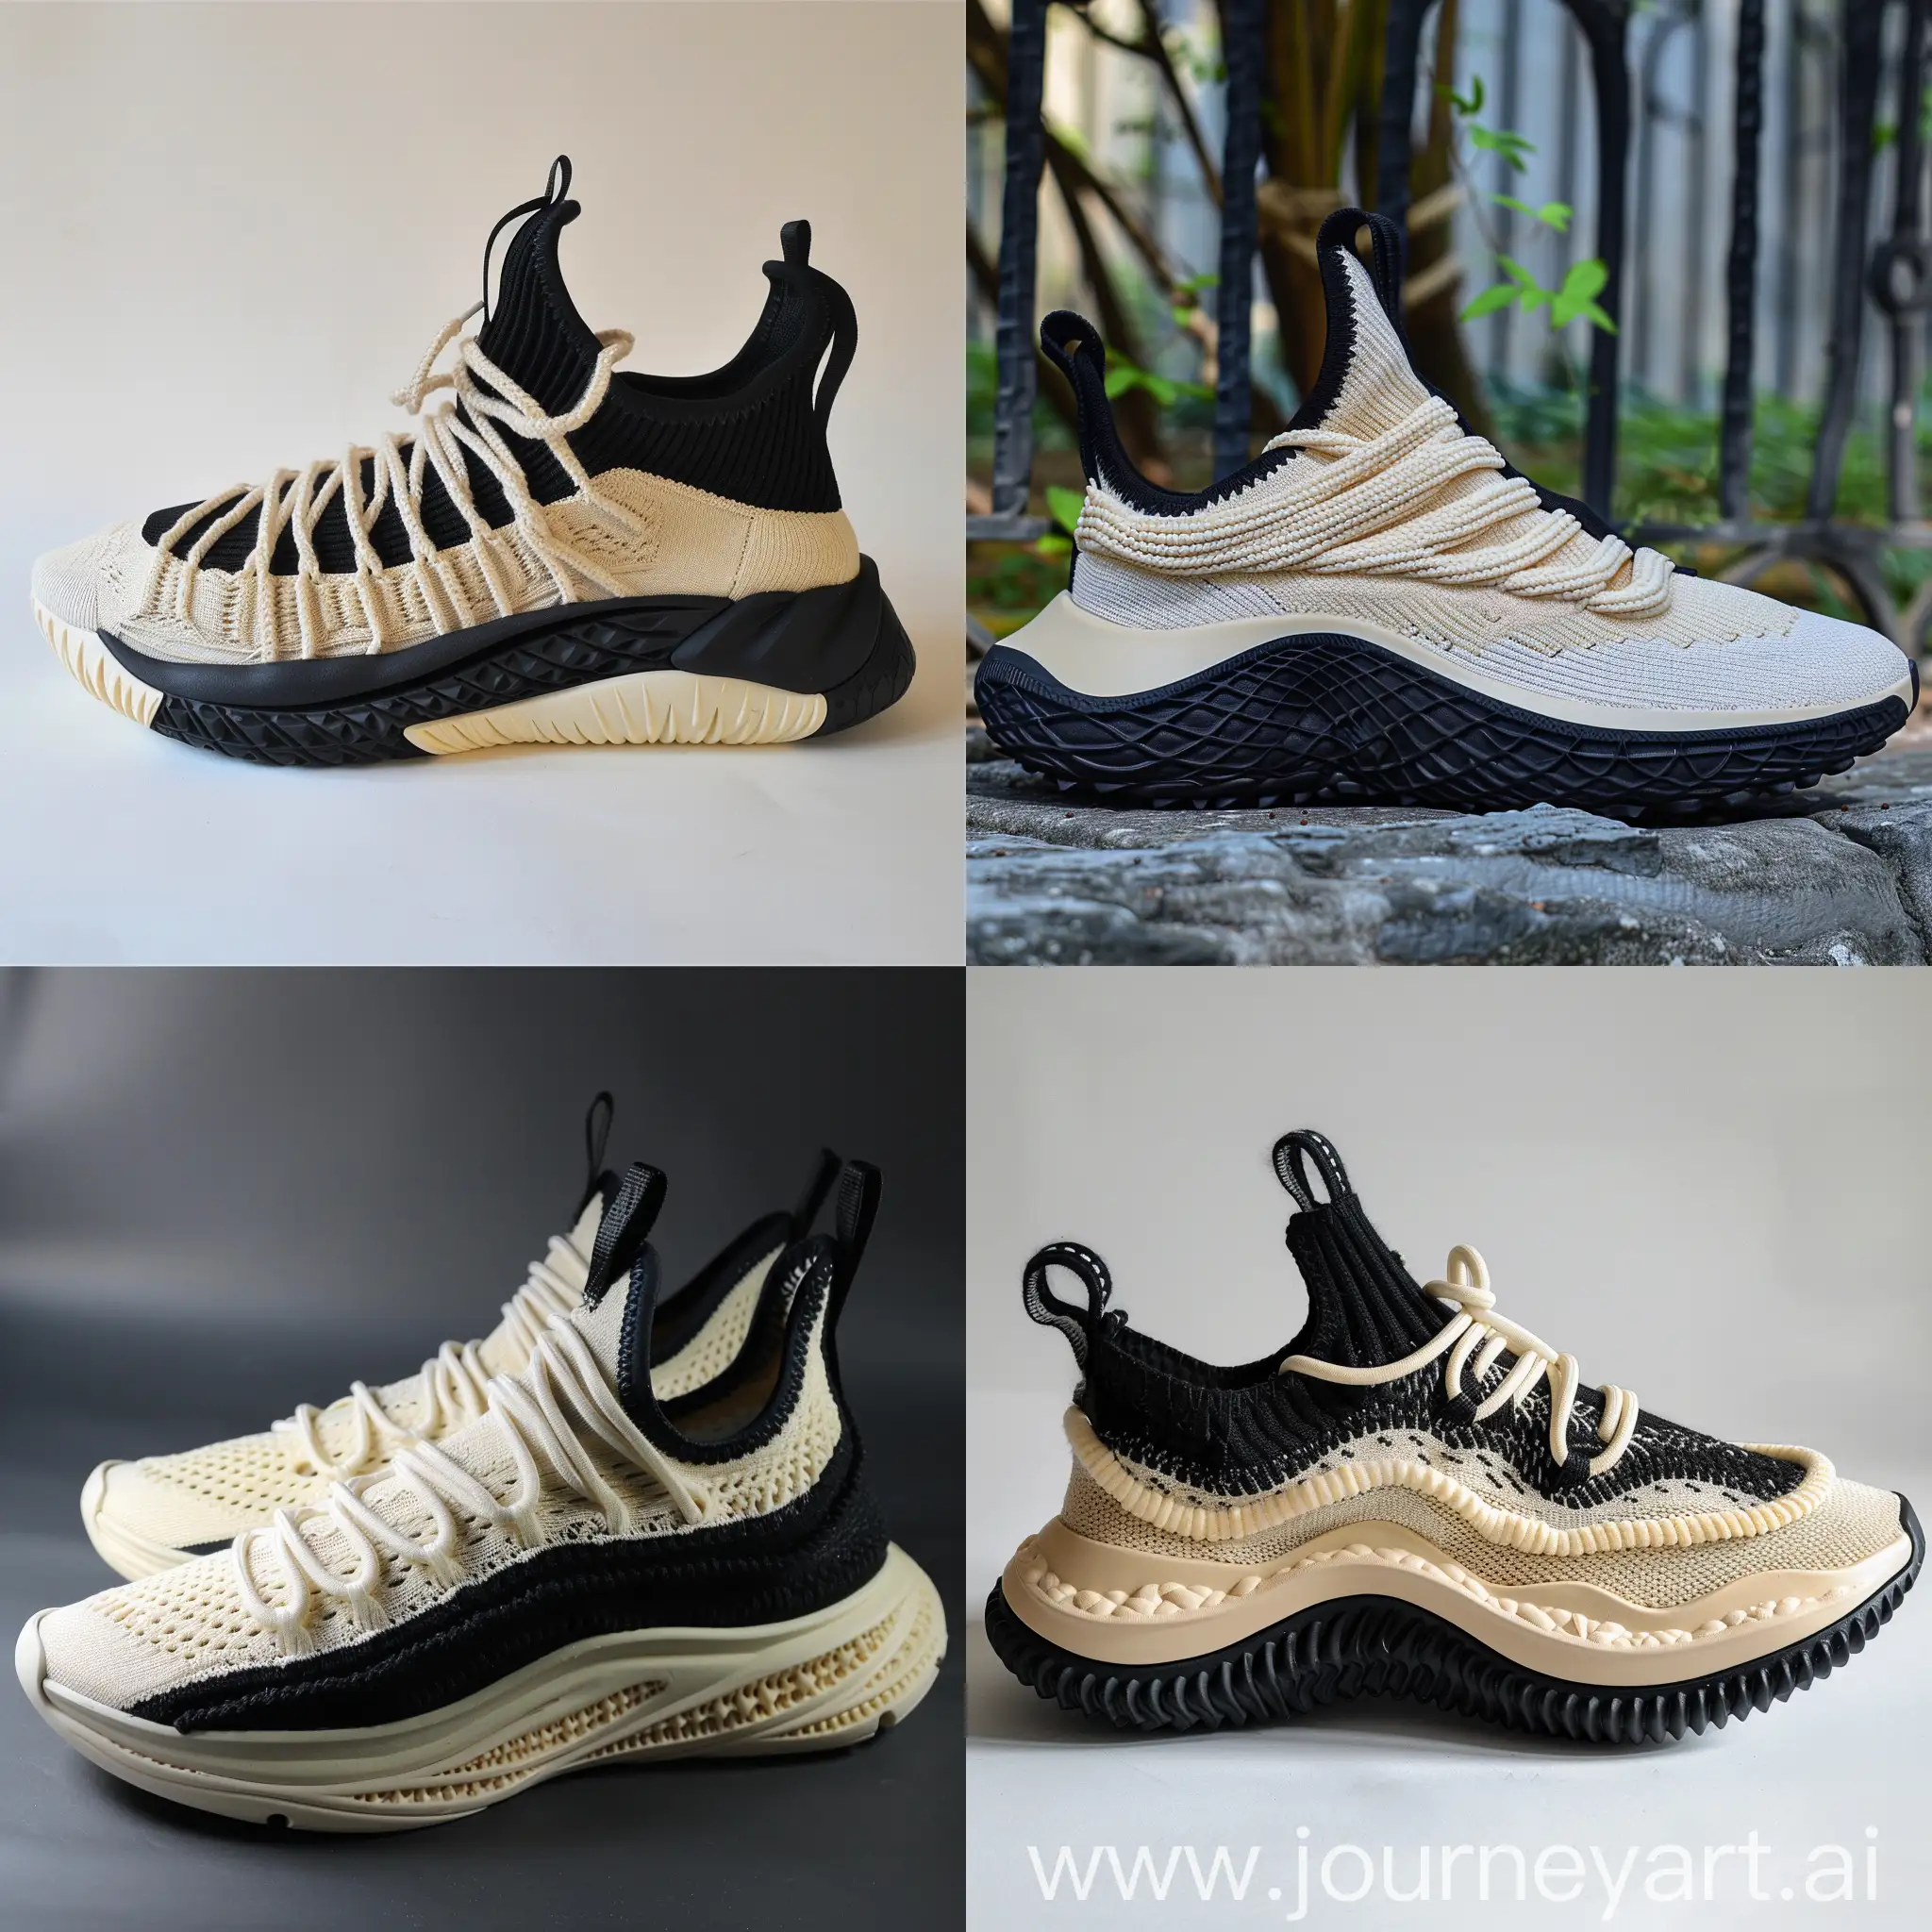 Sneakers design , running and sports , inspired by orca whale , cream color rubber midsole , knitted cables on midsole , some knitted cables on upper , upper color black and cream , low neck , black outsole , knitted laces , 